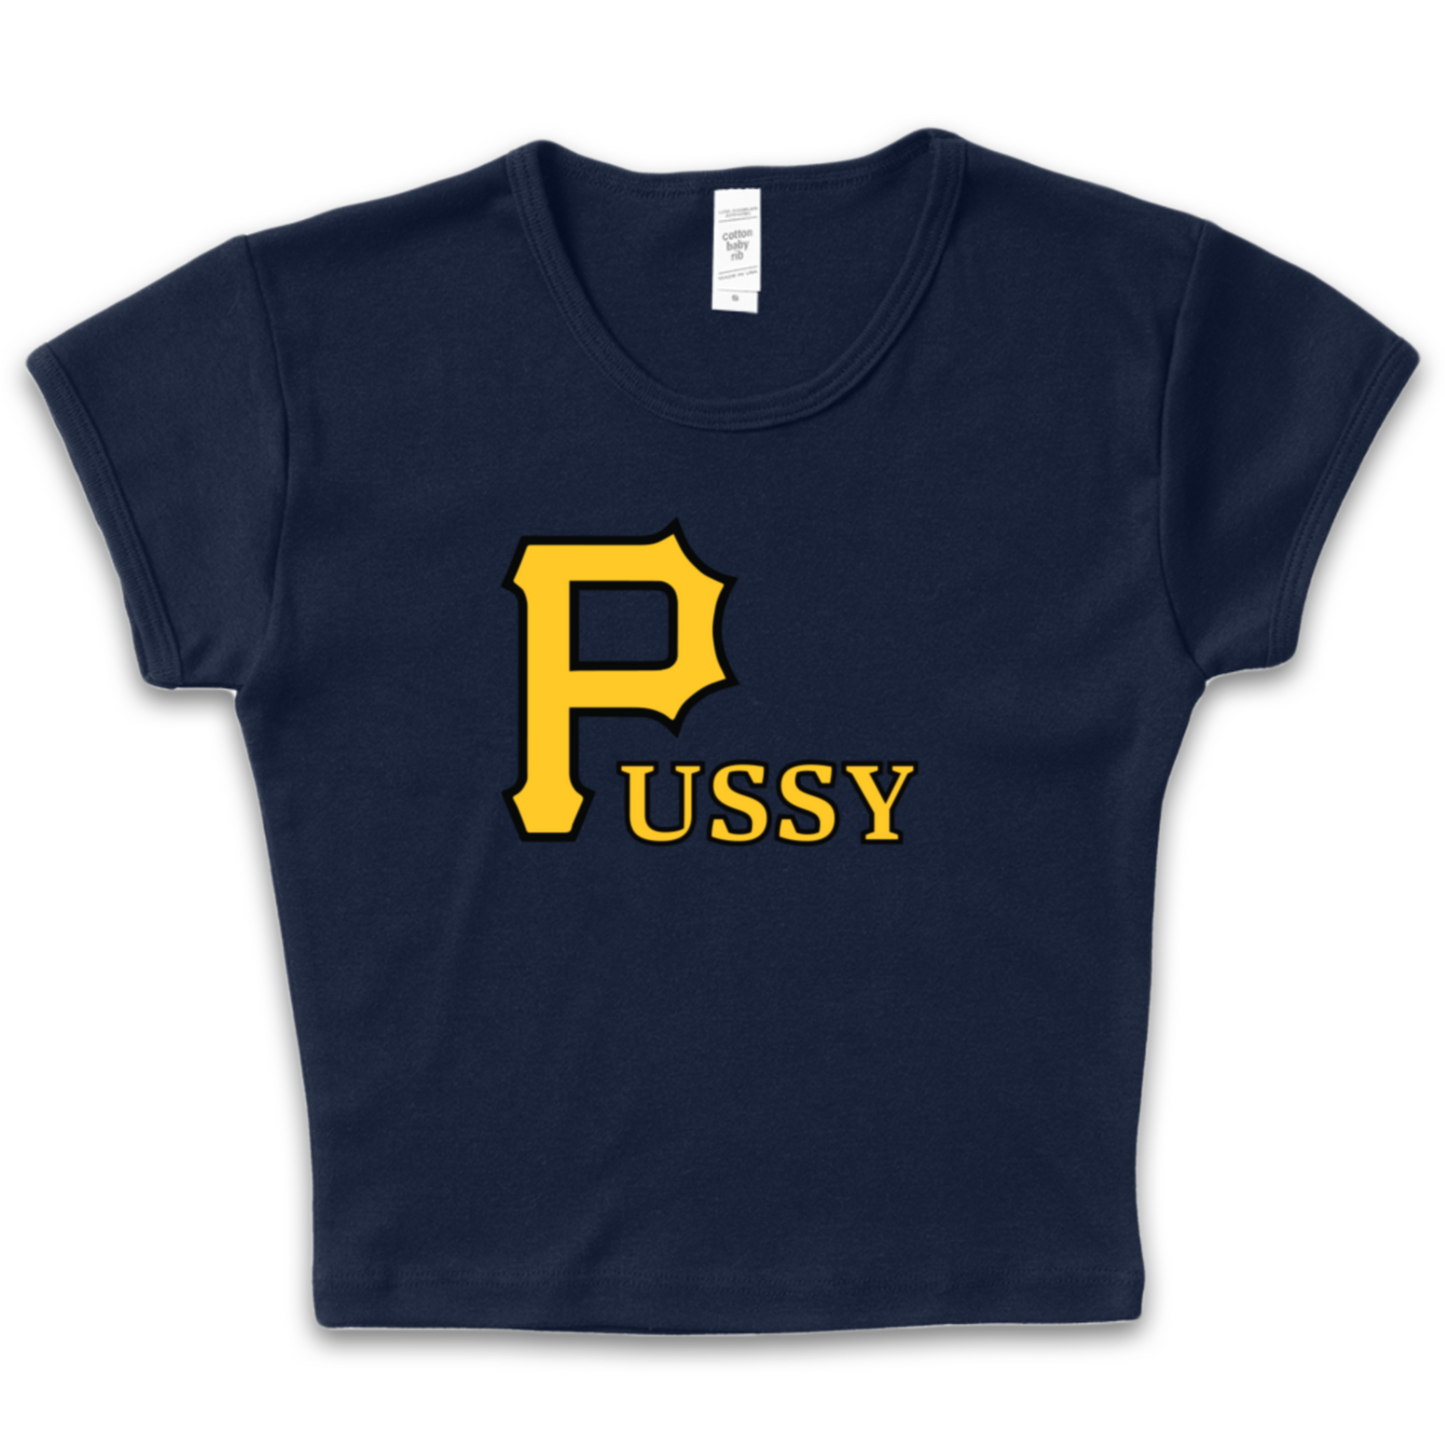 Pittsburgh Pussy Baby Tee